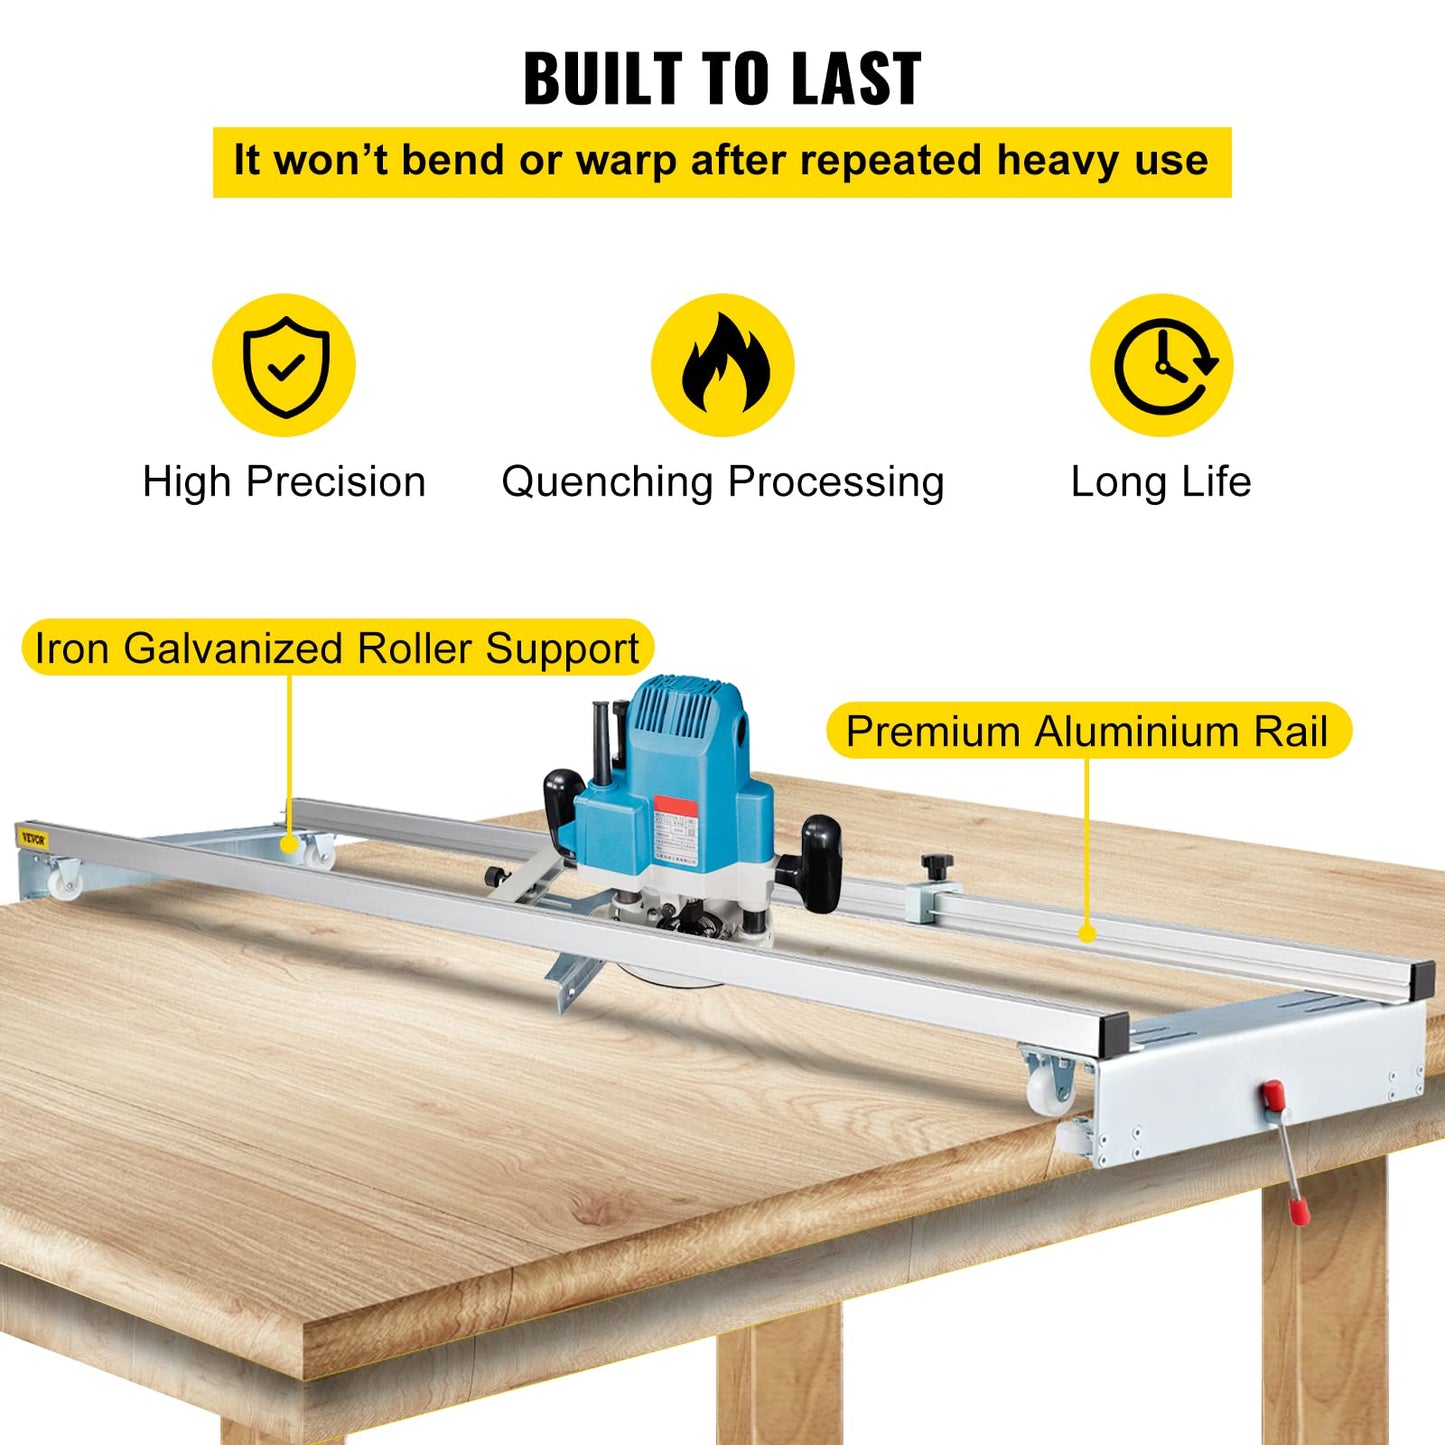 VEVOR Router Sled, 60 inches / 152.4cm Width, Slab Guide Jig for Woodworking with Locking Function, Portable and Easy to Adjust, Trimming Planing